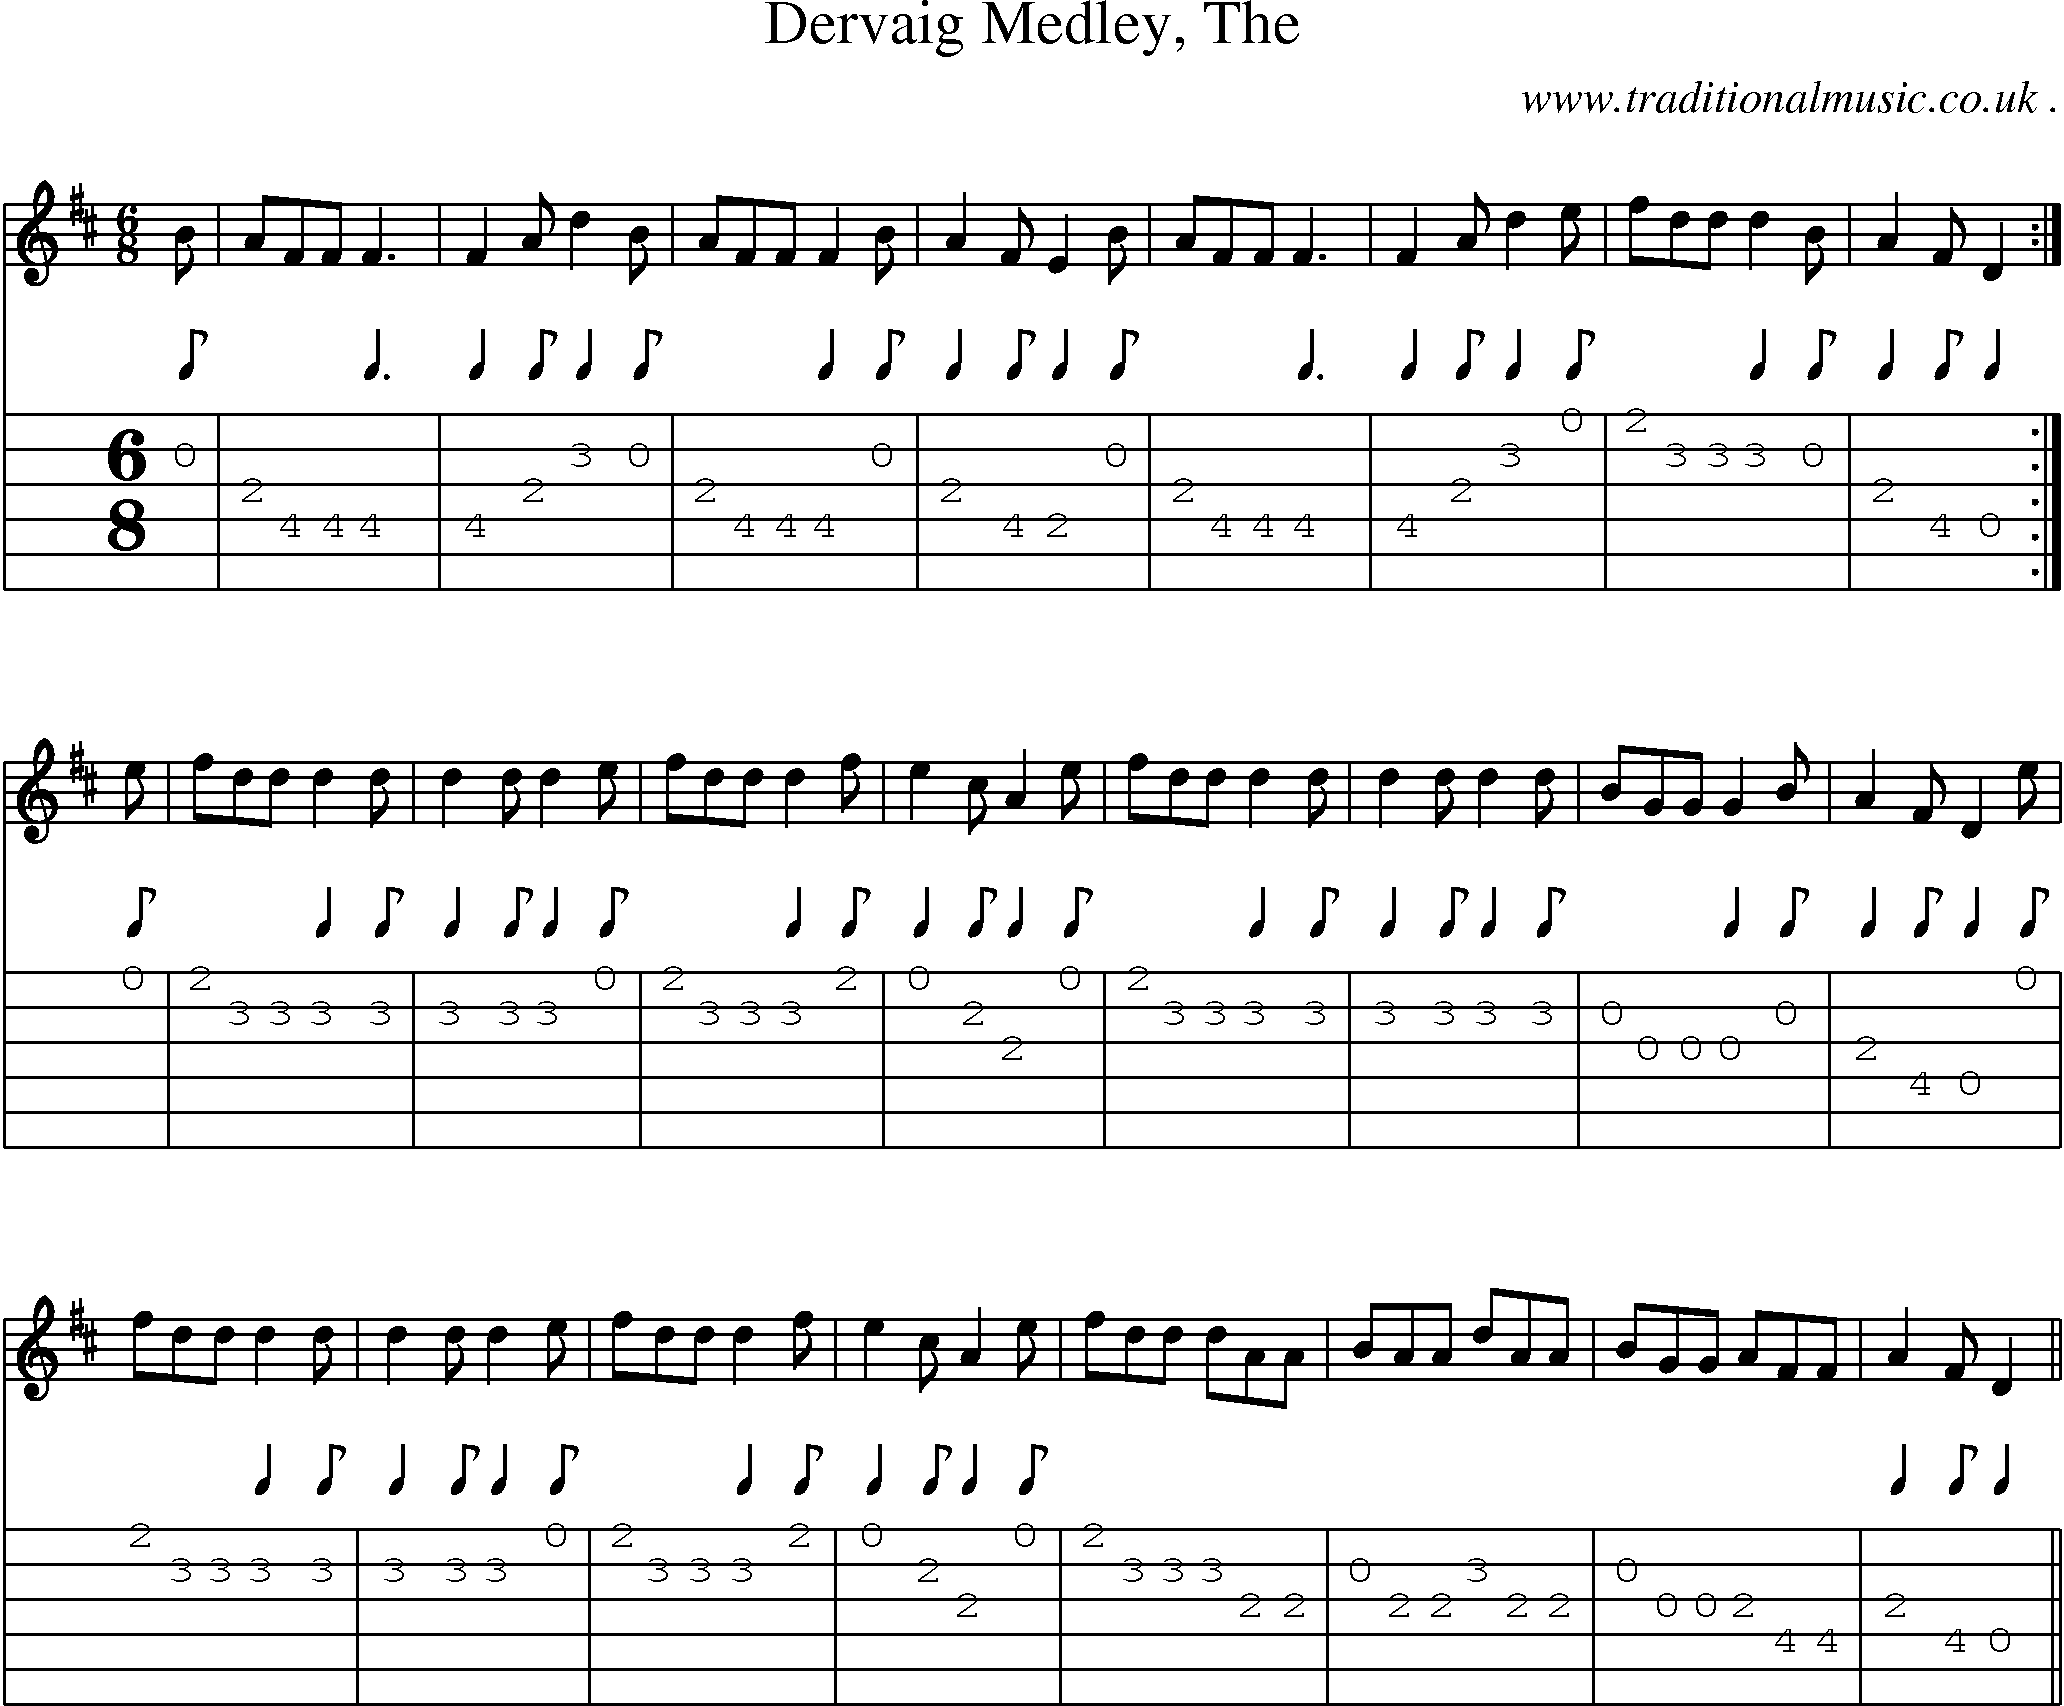 Sheet-music  score, Chords and Guitar Tabs for Dervaig Medley The